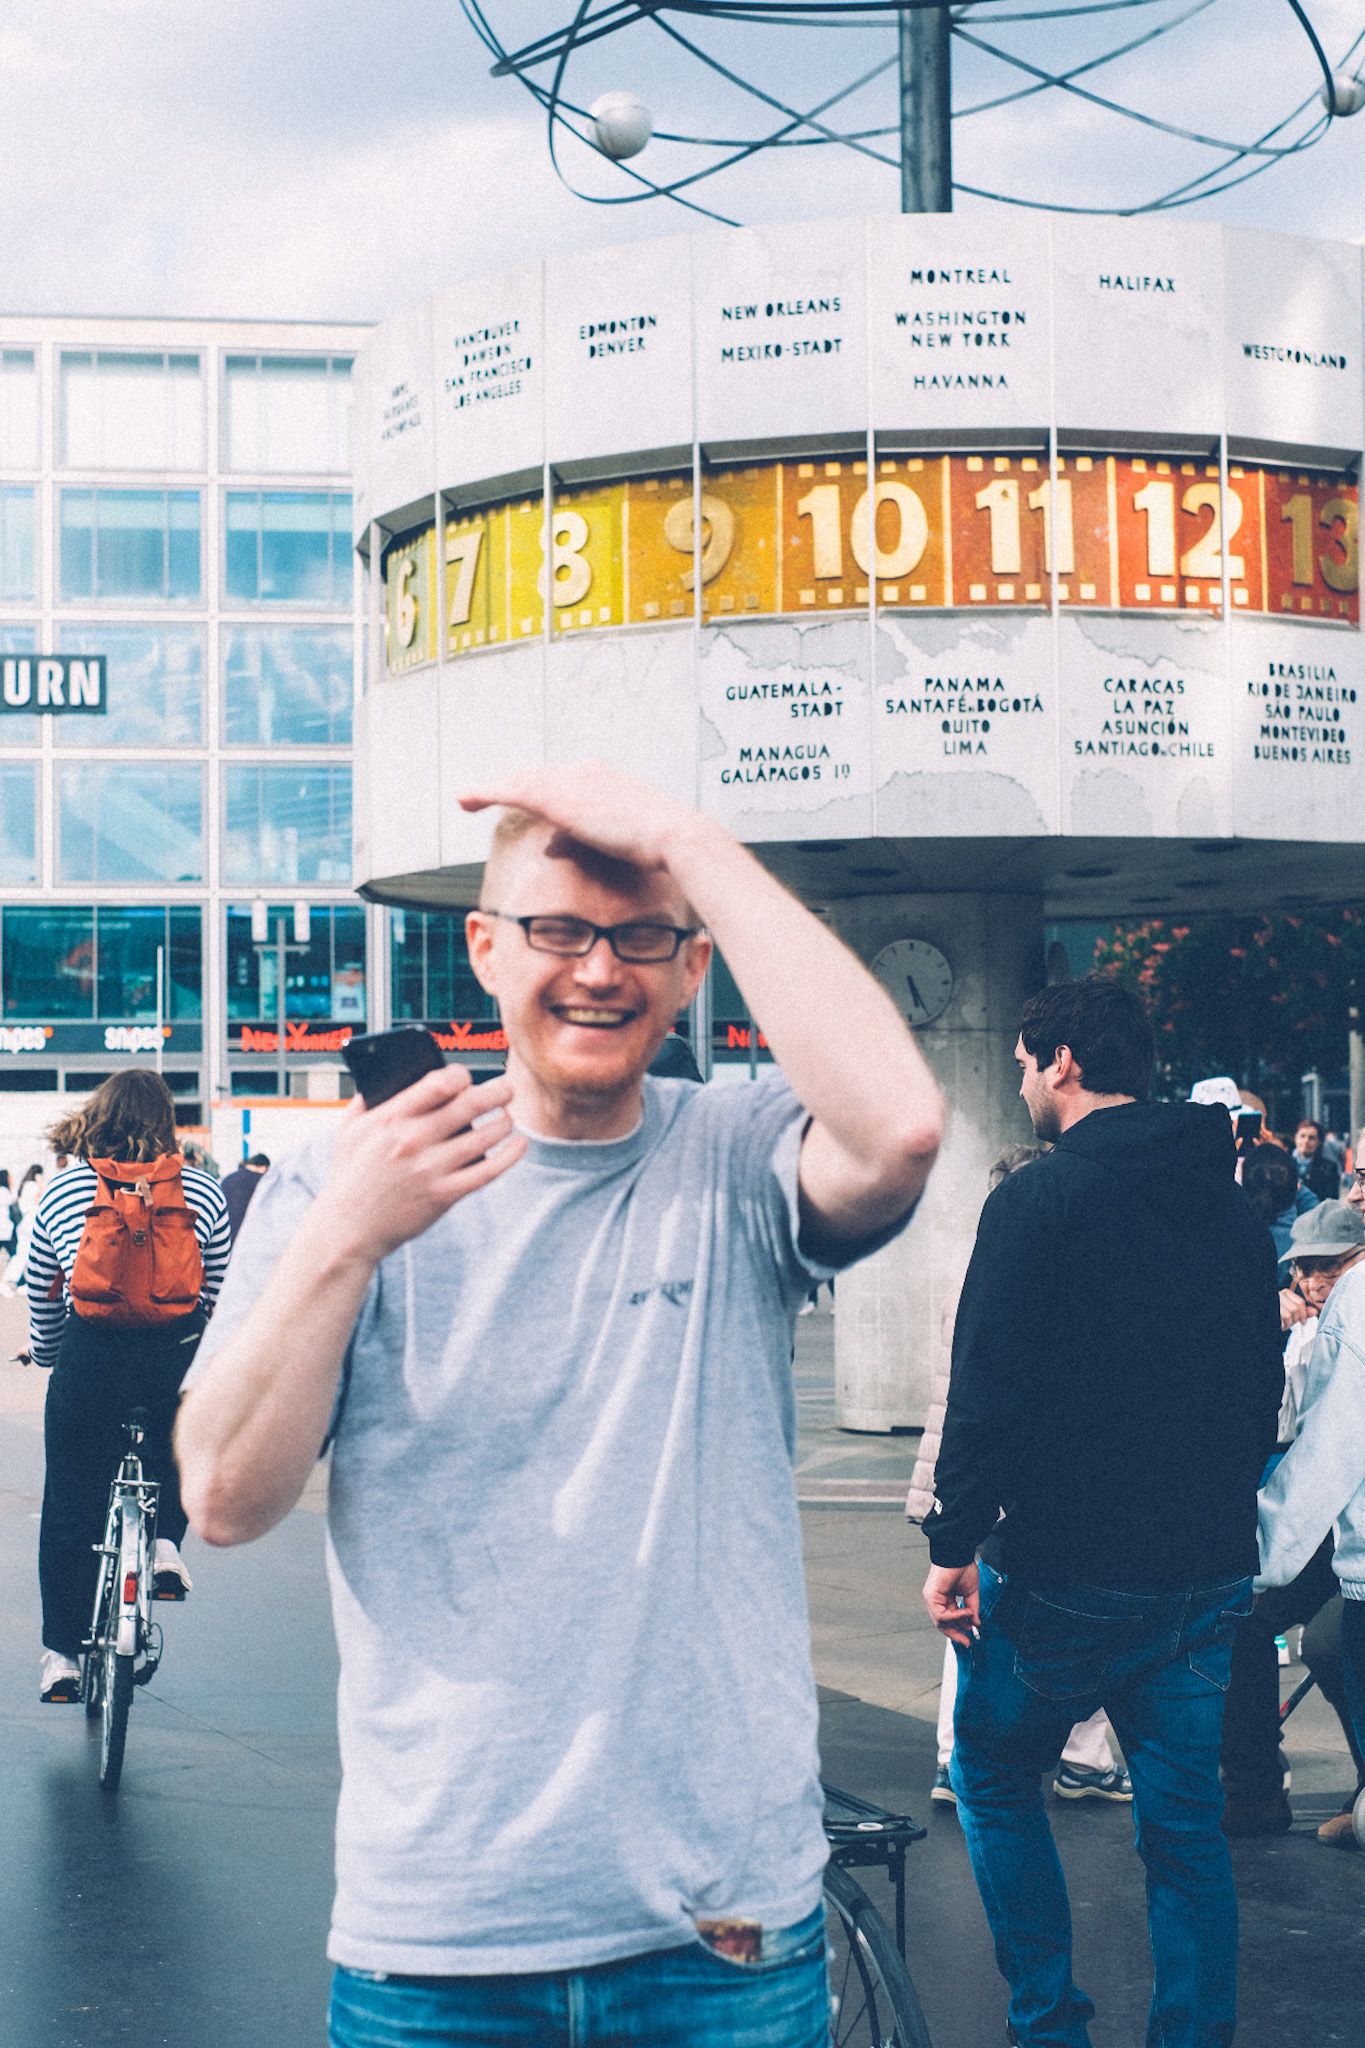 A man stands in front of the world clock installation in Berlin, smiling in front of crowds, grabbing his head with his hands.